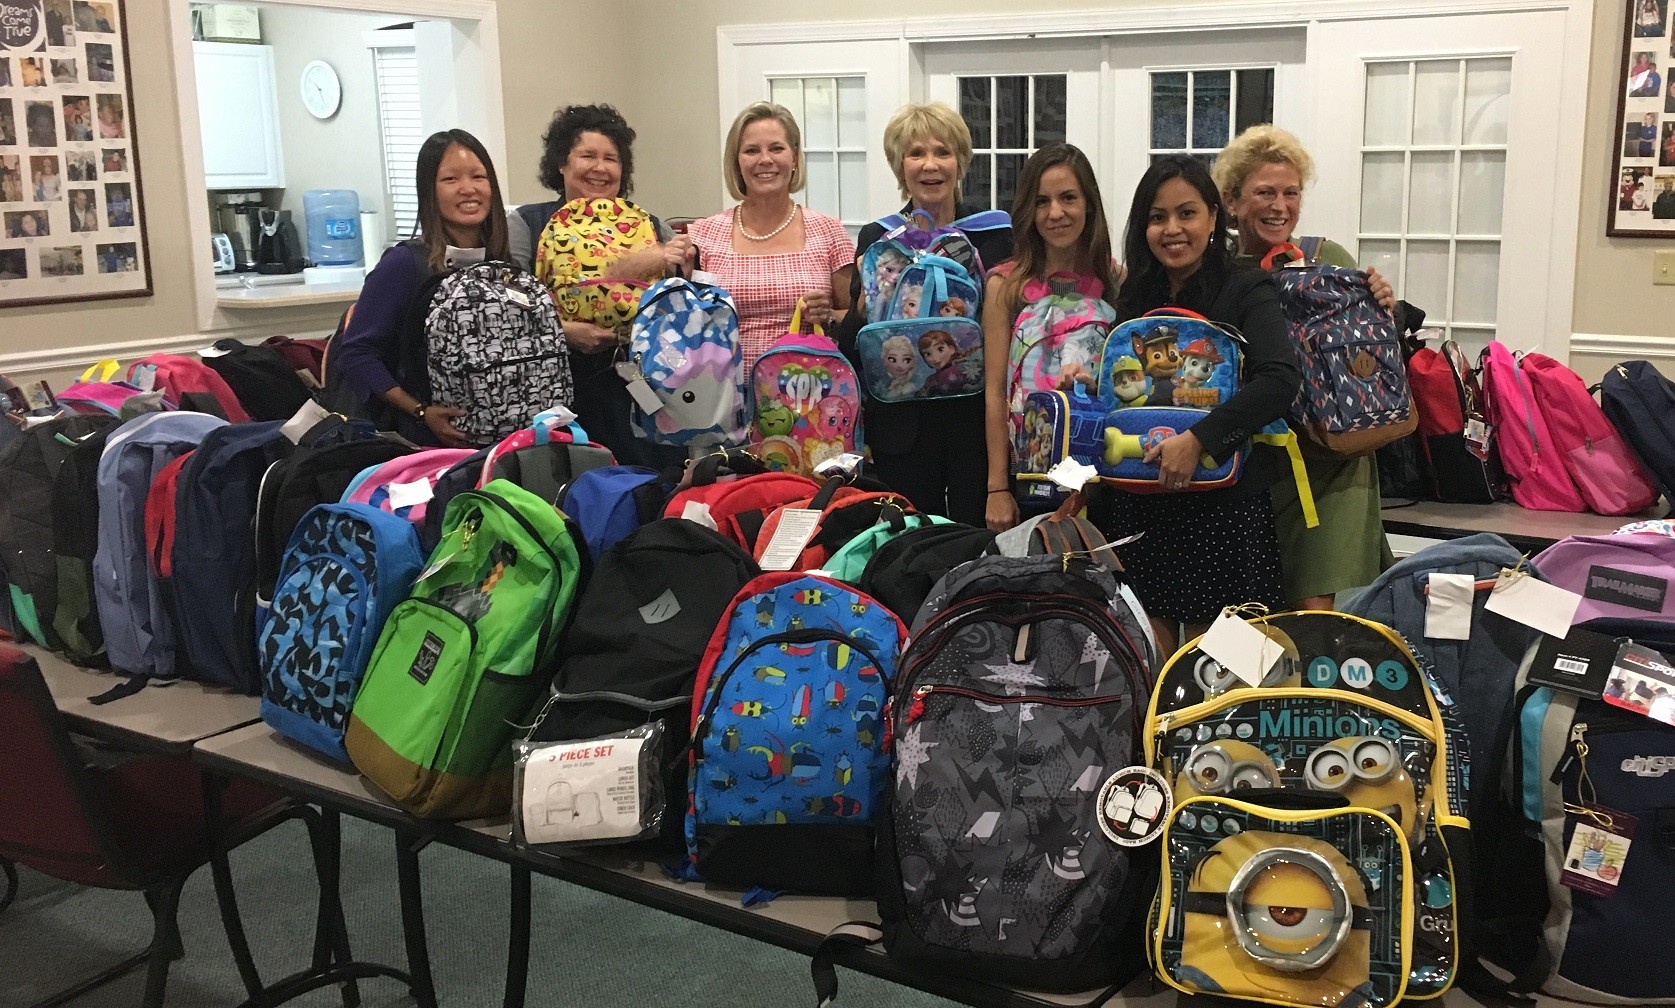 Marisa Mariano, Marian Snovell, Christy Budnick, Linda Sherrer, Brenna Antram, Chantha Bisher and Maria Wilkes hold backpacks donated to Berkshire Hathaway HomeServices Florida Network Realty’s 18th annual Backpack Challenge.